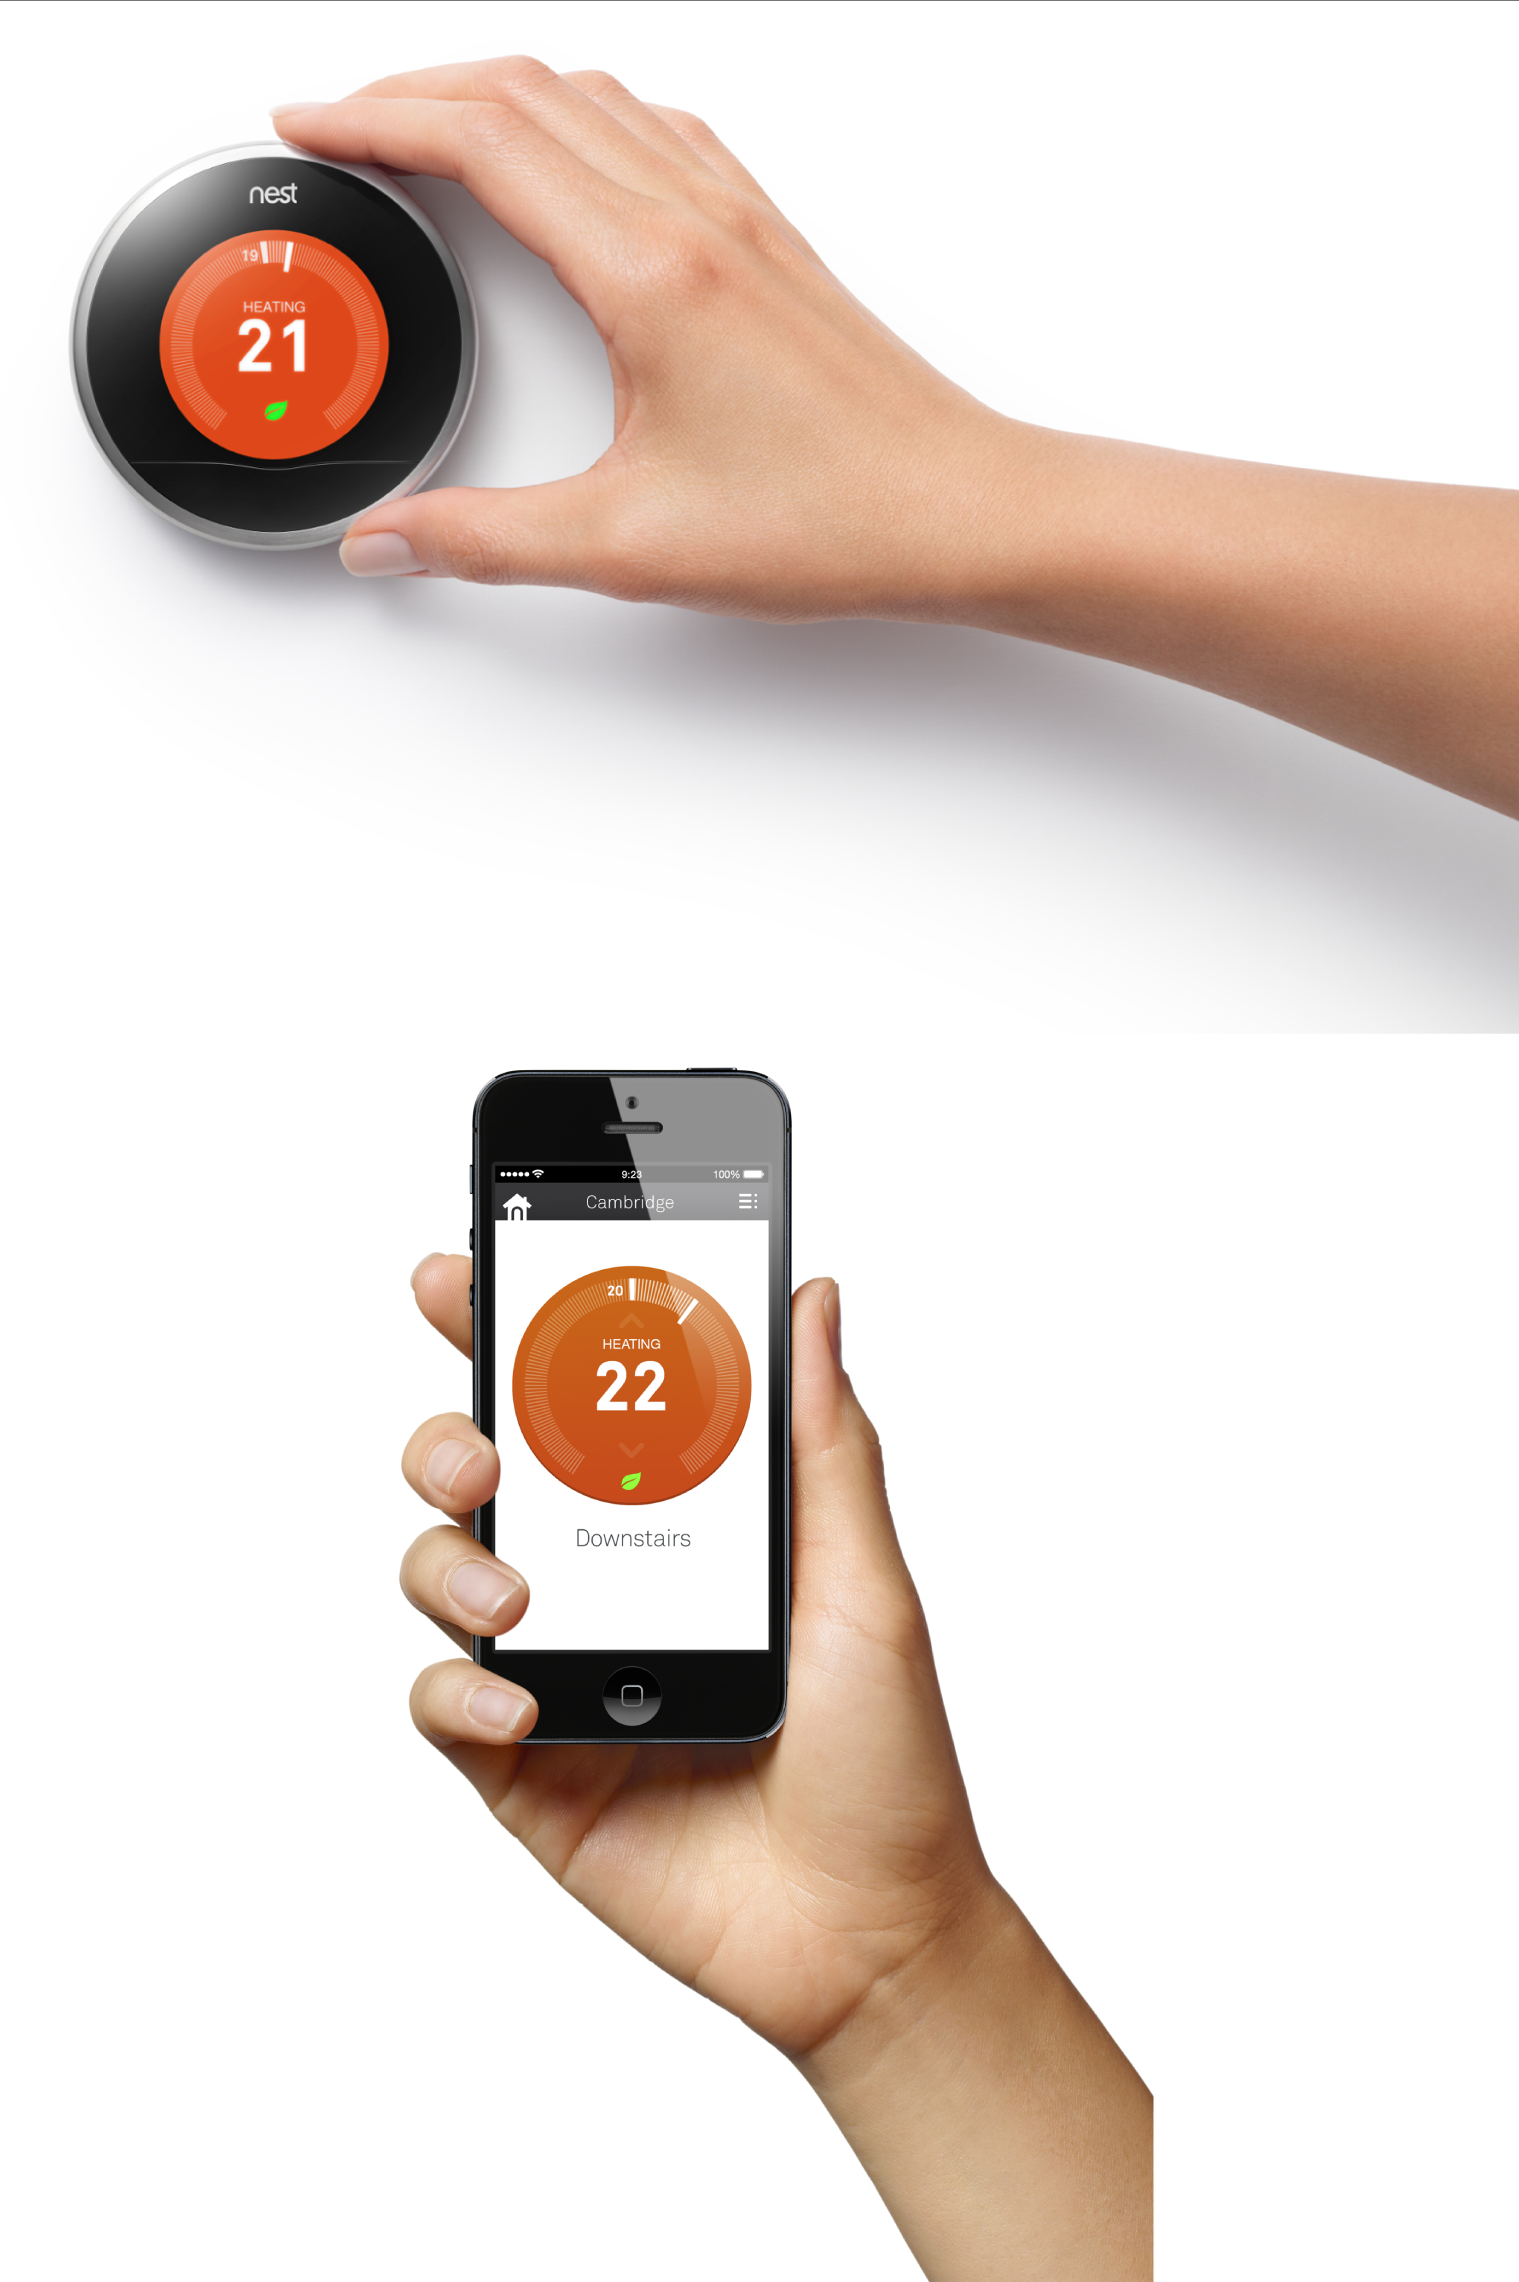 The Nest thermostat’s primary user input method is a rotating bezel. But the smartphone app is optimized for tapping: it does not simulate dragging a fake bezel. The thermostat and app use complementary visual styling—tapping the smartphone interface produces the same subtle “click” as rotating the bezel on the physical device. This helps the interfaces feel like part of the same family (images: Nest).